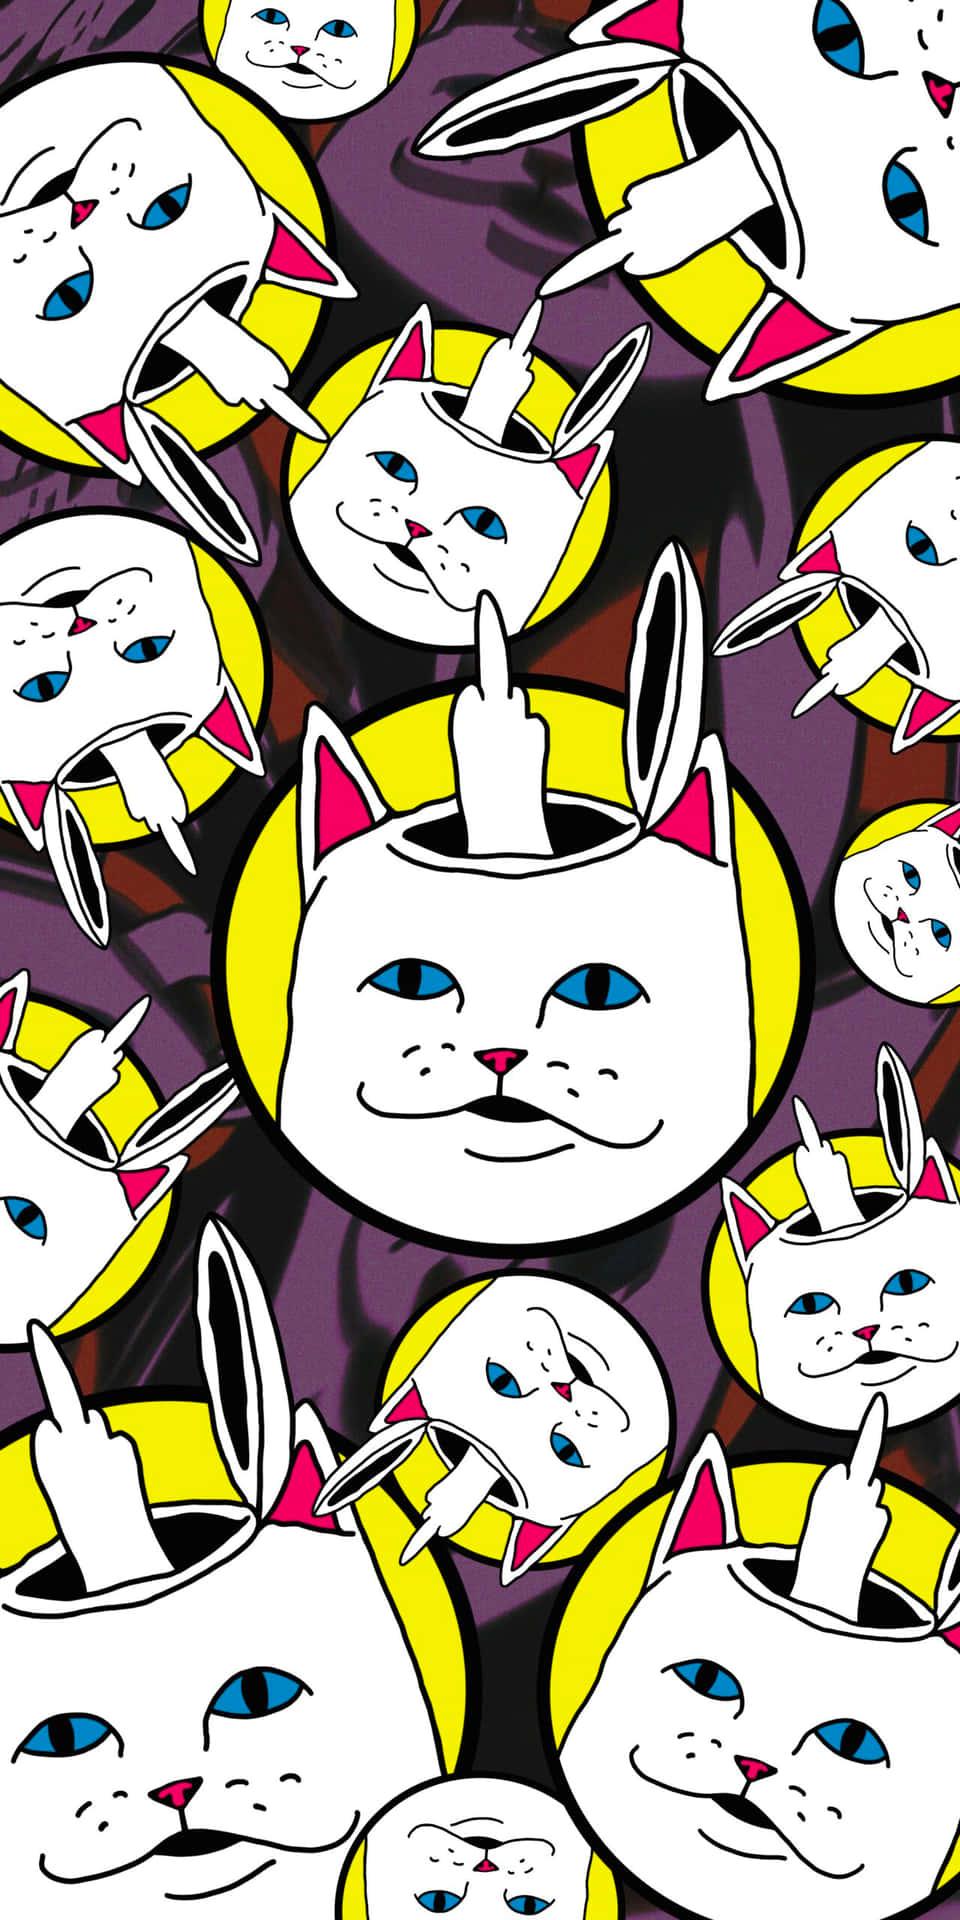 Join Lord Nermal in his adventures. Wallpaper